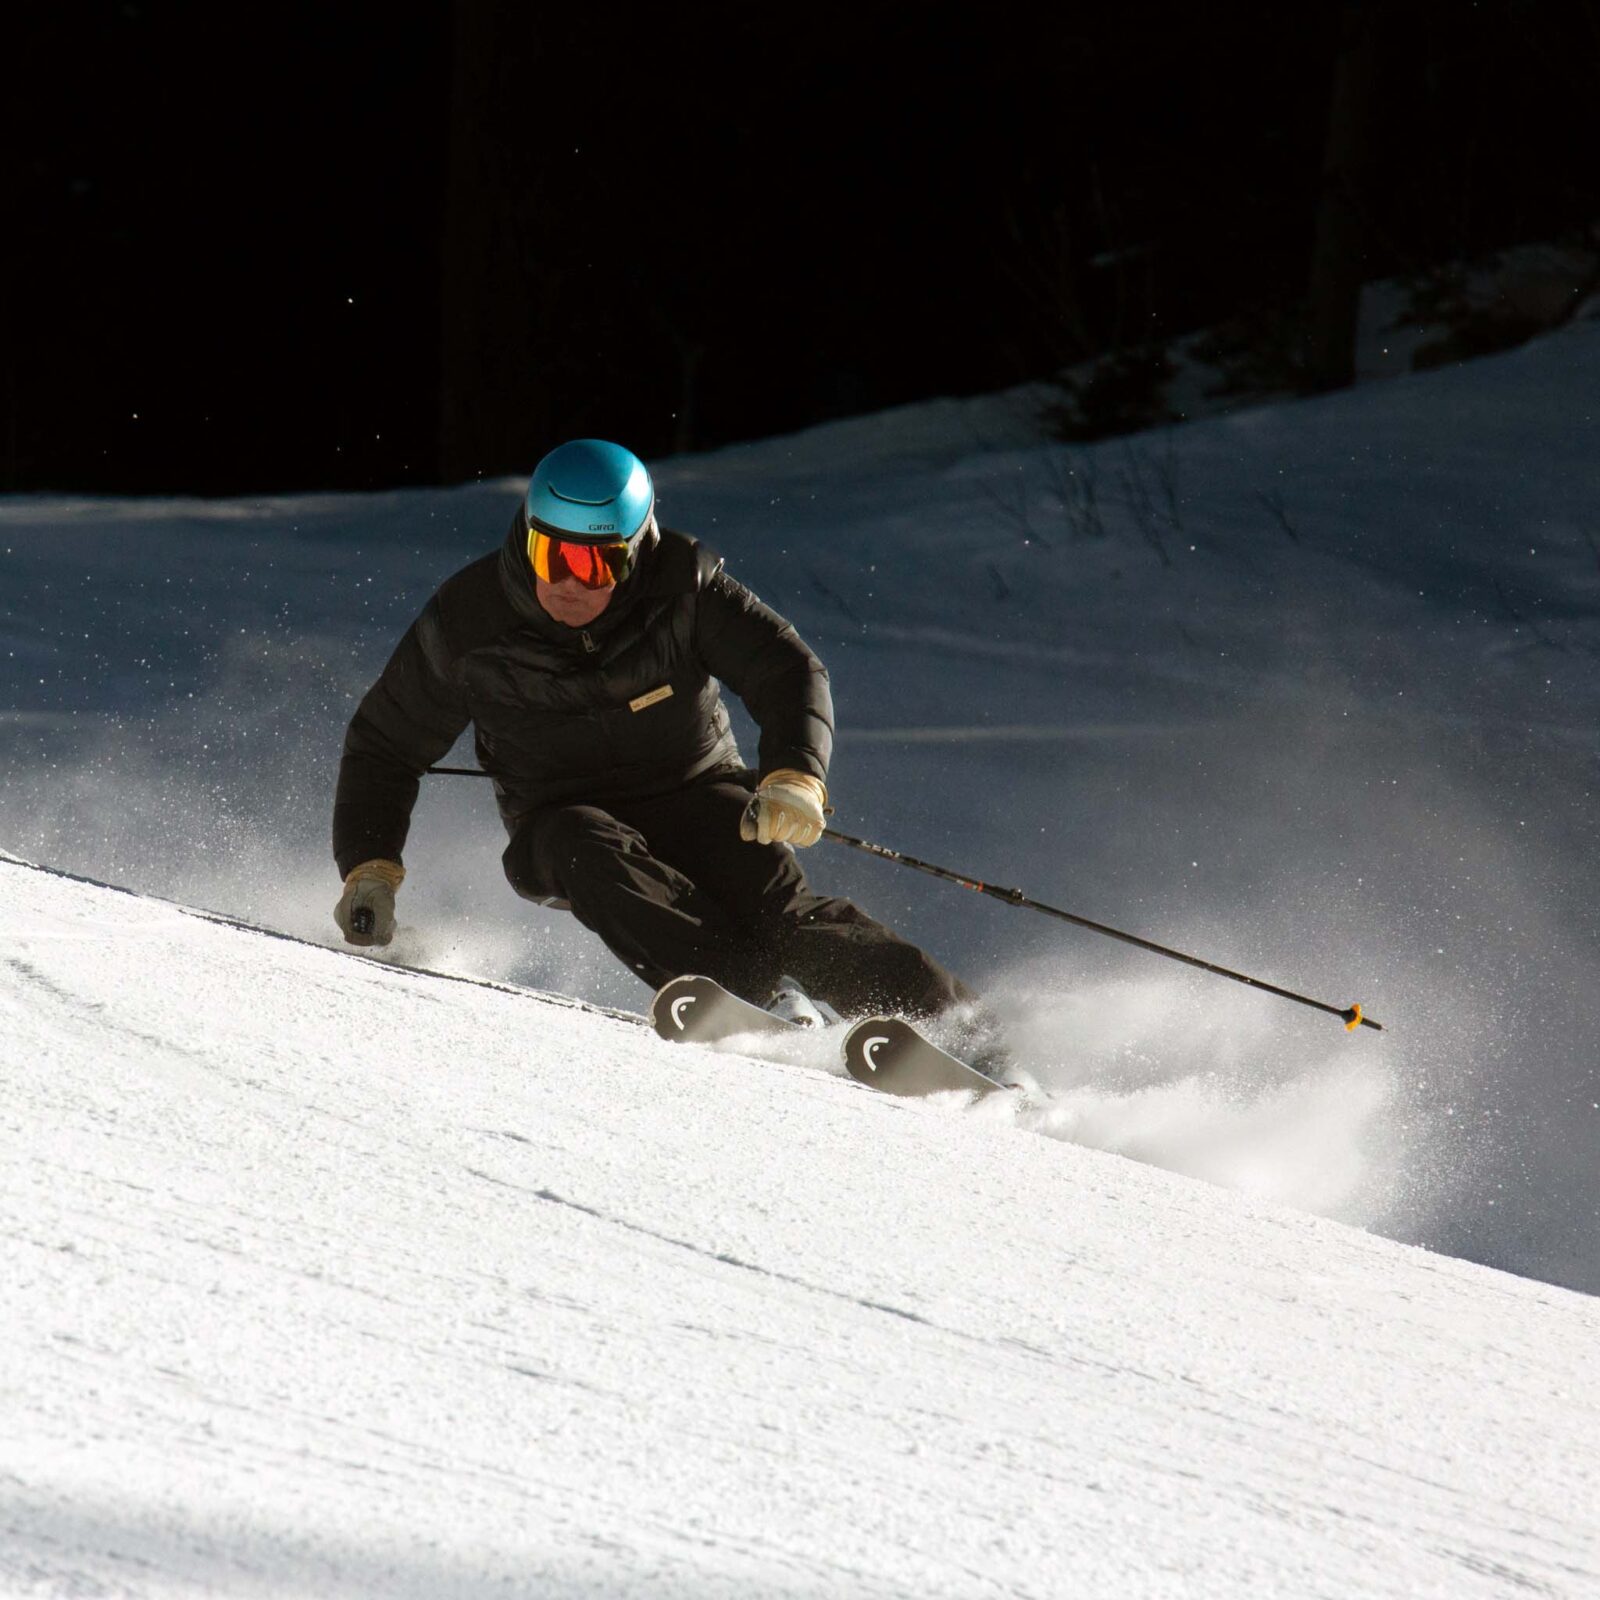 Skier in black jacket and blue helmet carving an aggressive turn and spraying snow.